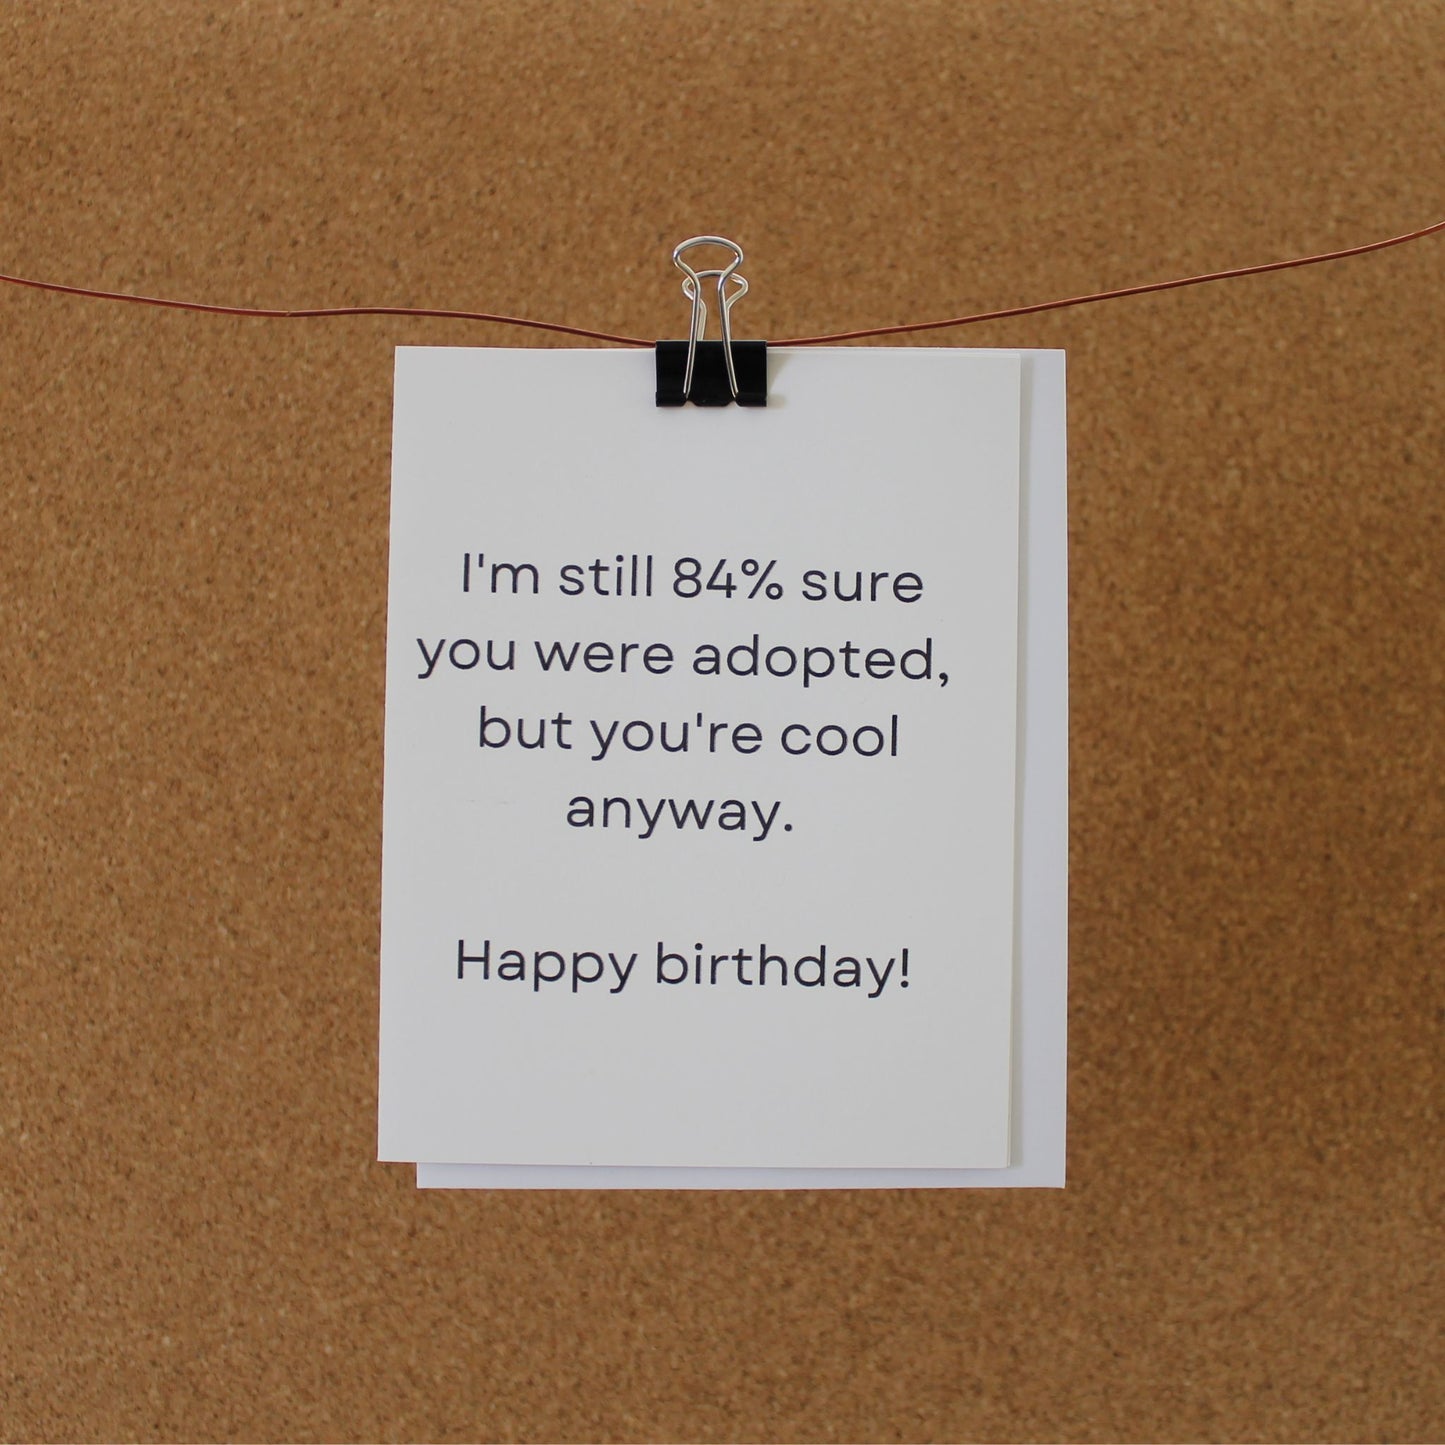 Funny Birthday Card: "I'm still 84% sure you're adopted, but you're cool anyway."